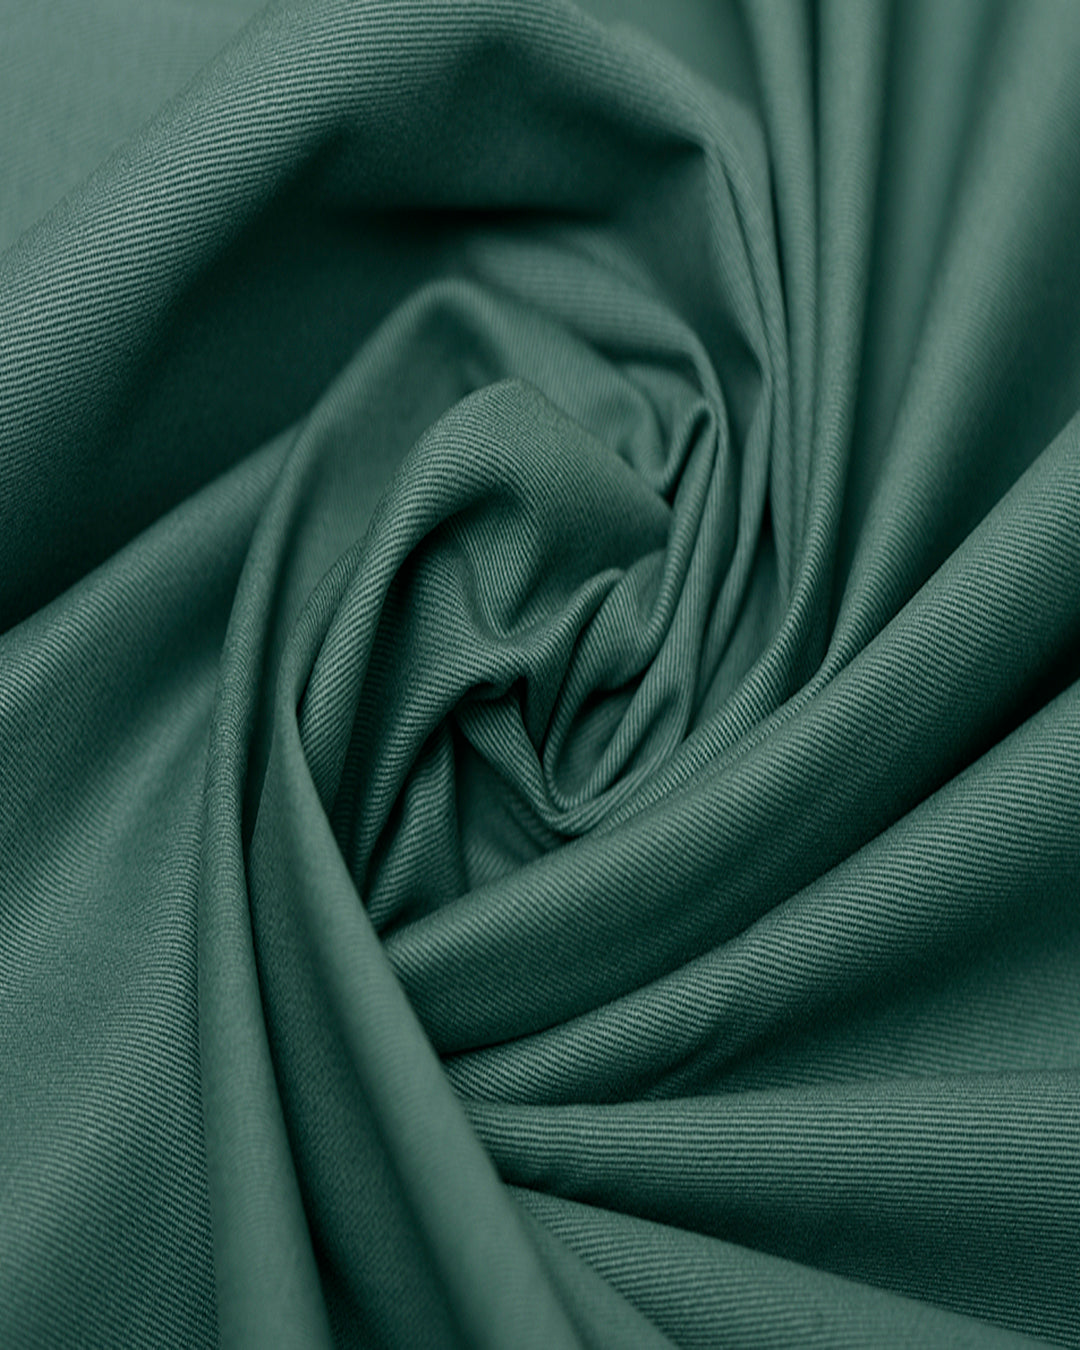 Close up view of custom Genoa Chino pants for men by Luxire in fern green